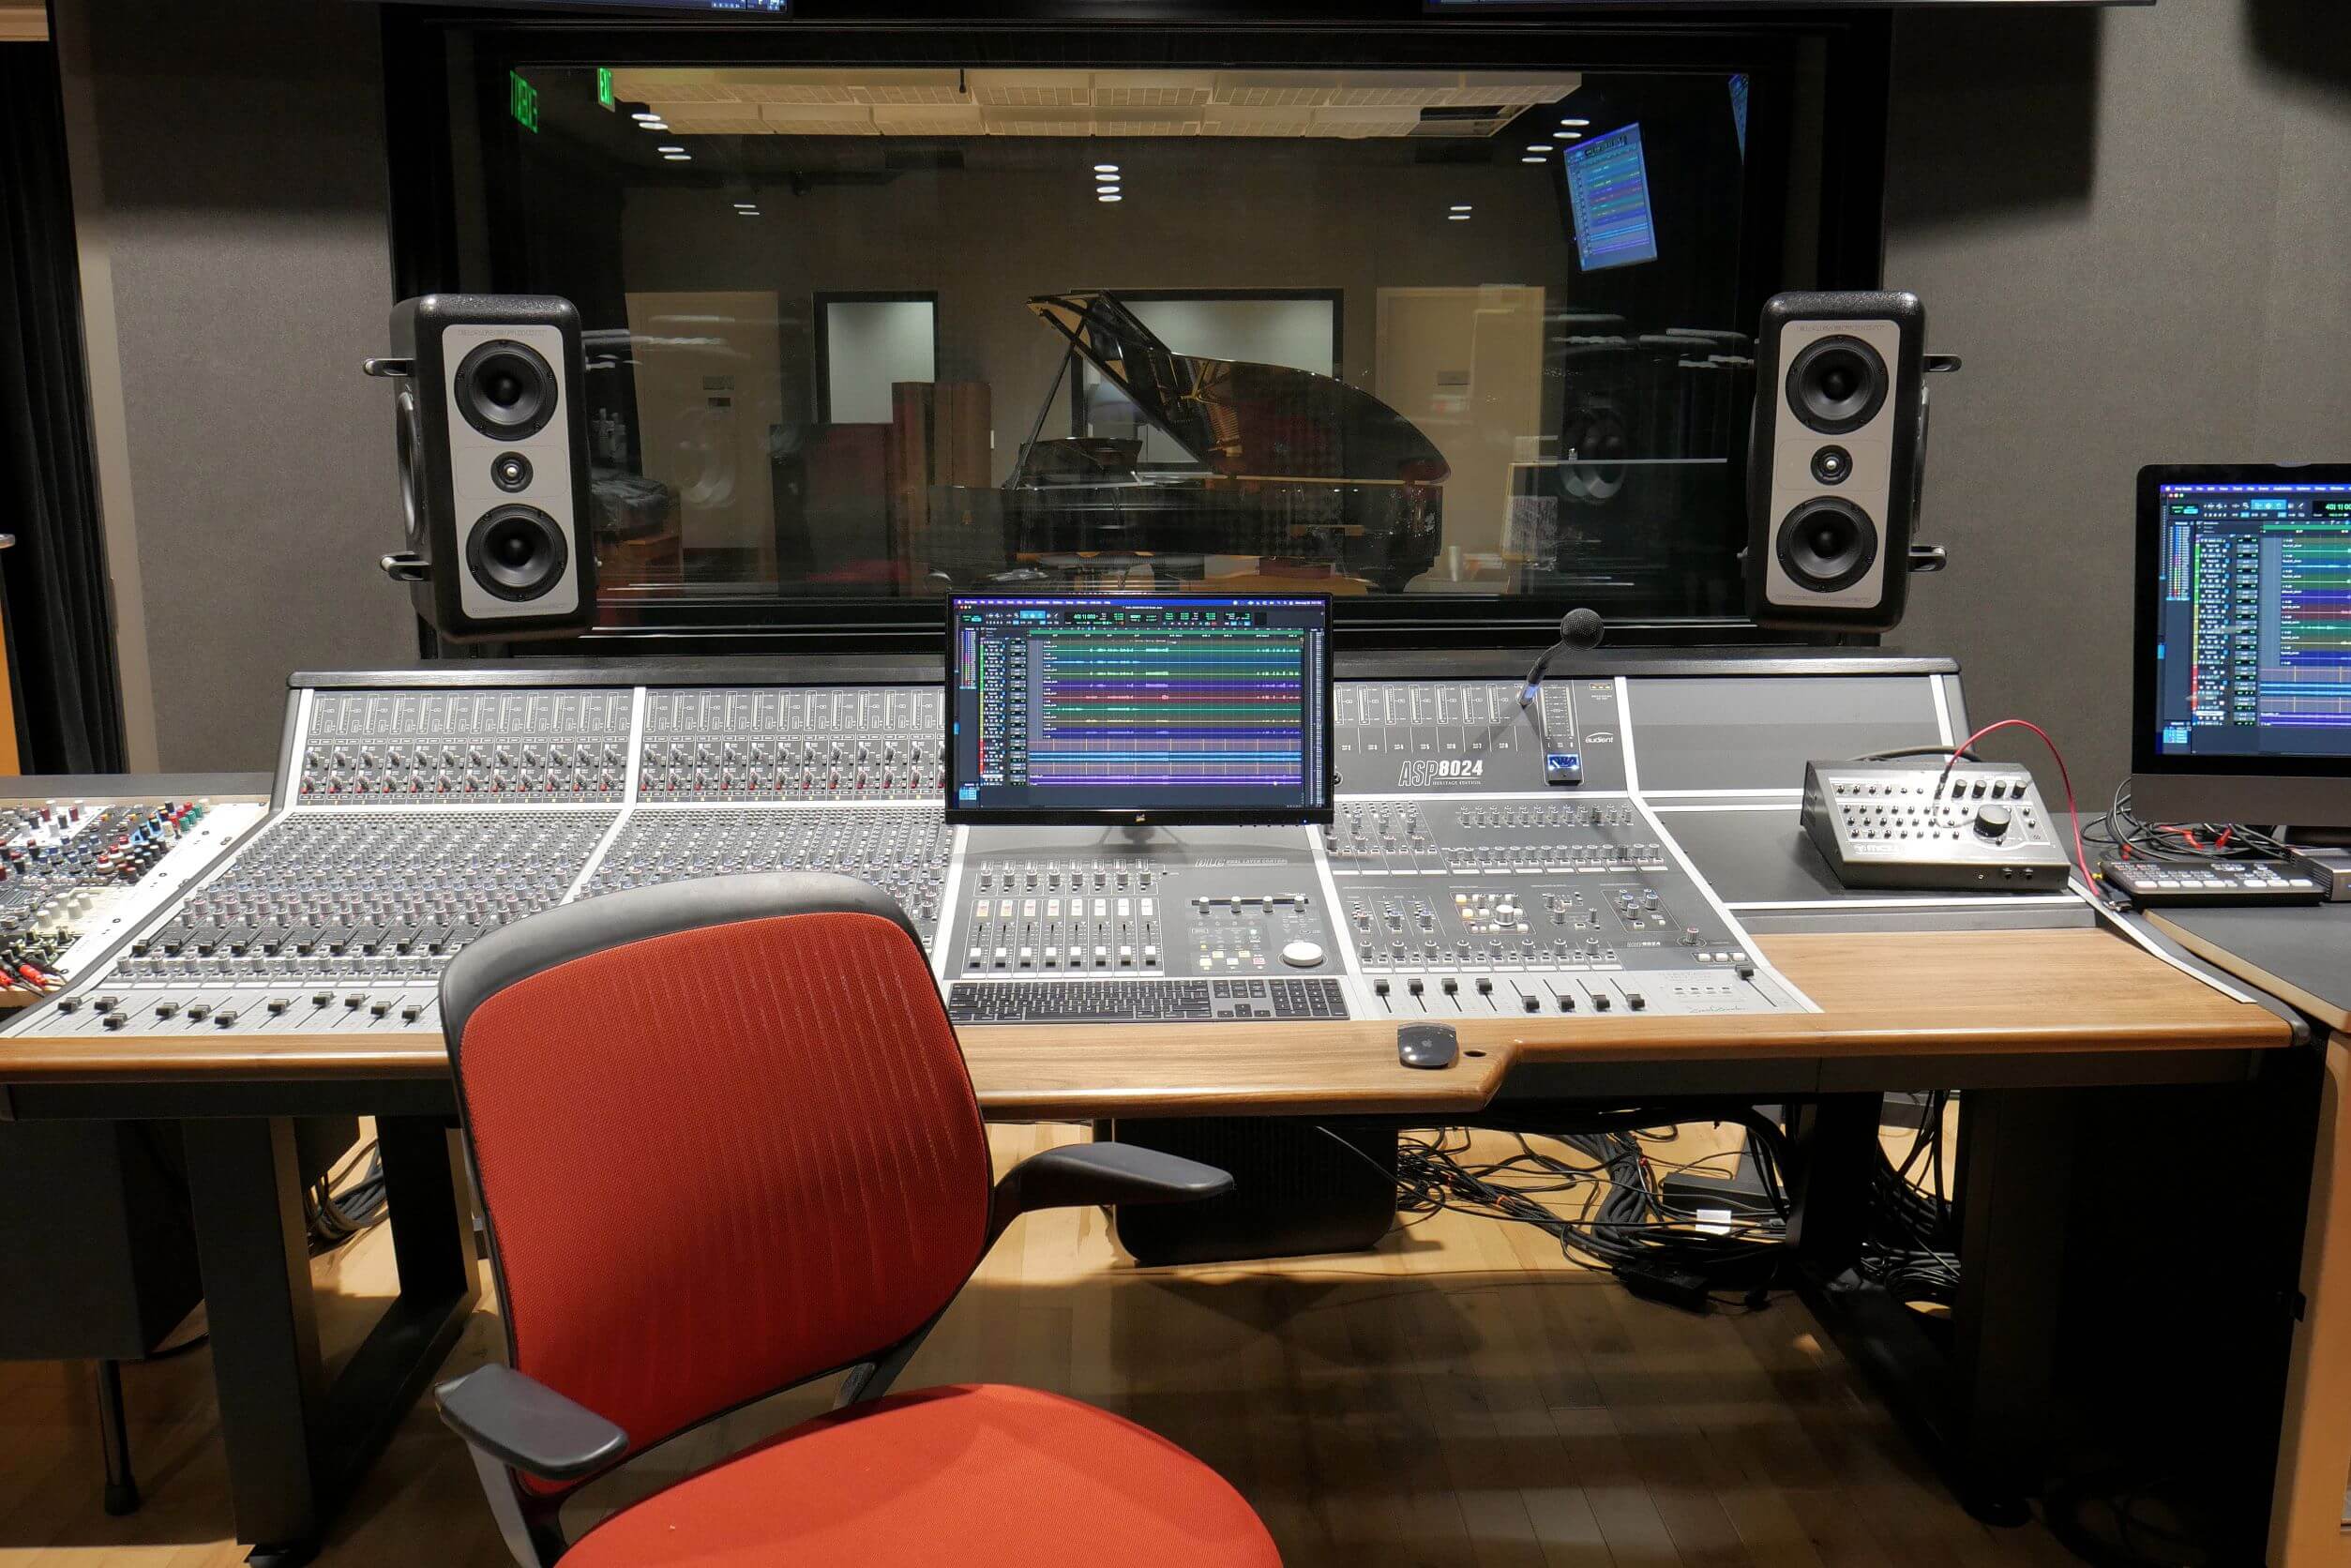 Reliability in the form of an Audient mixing console